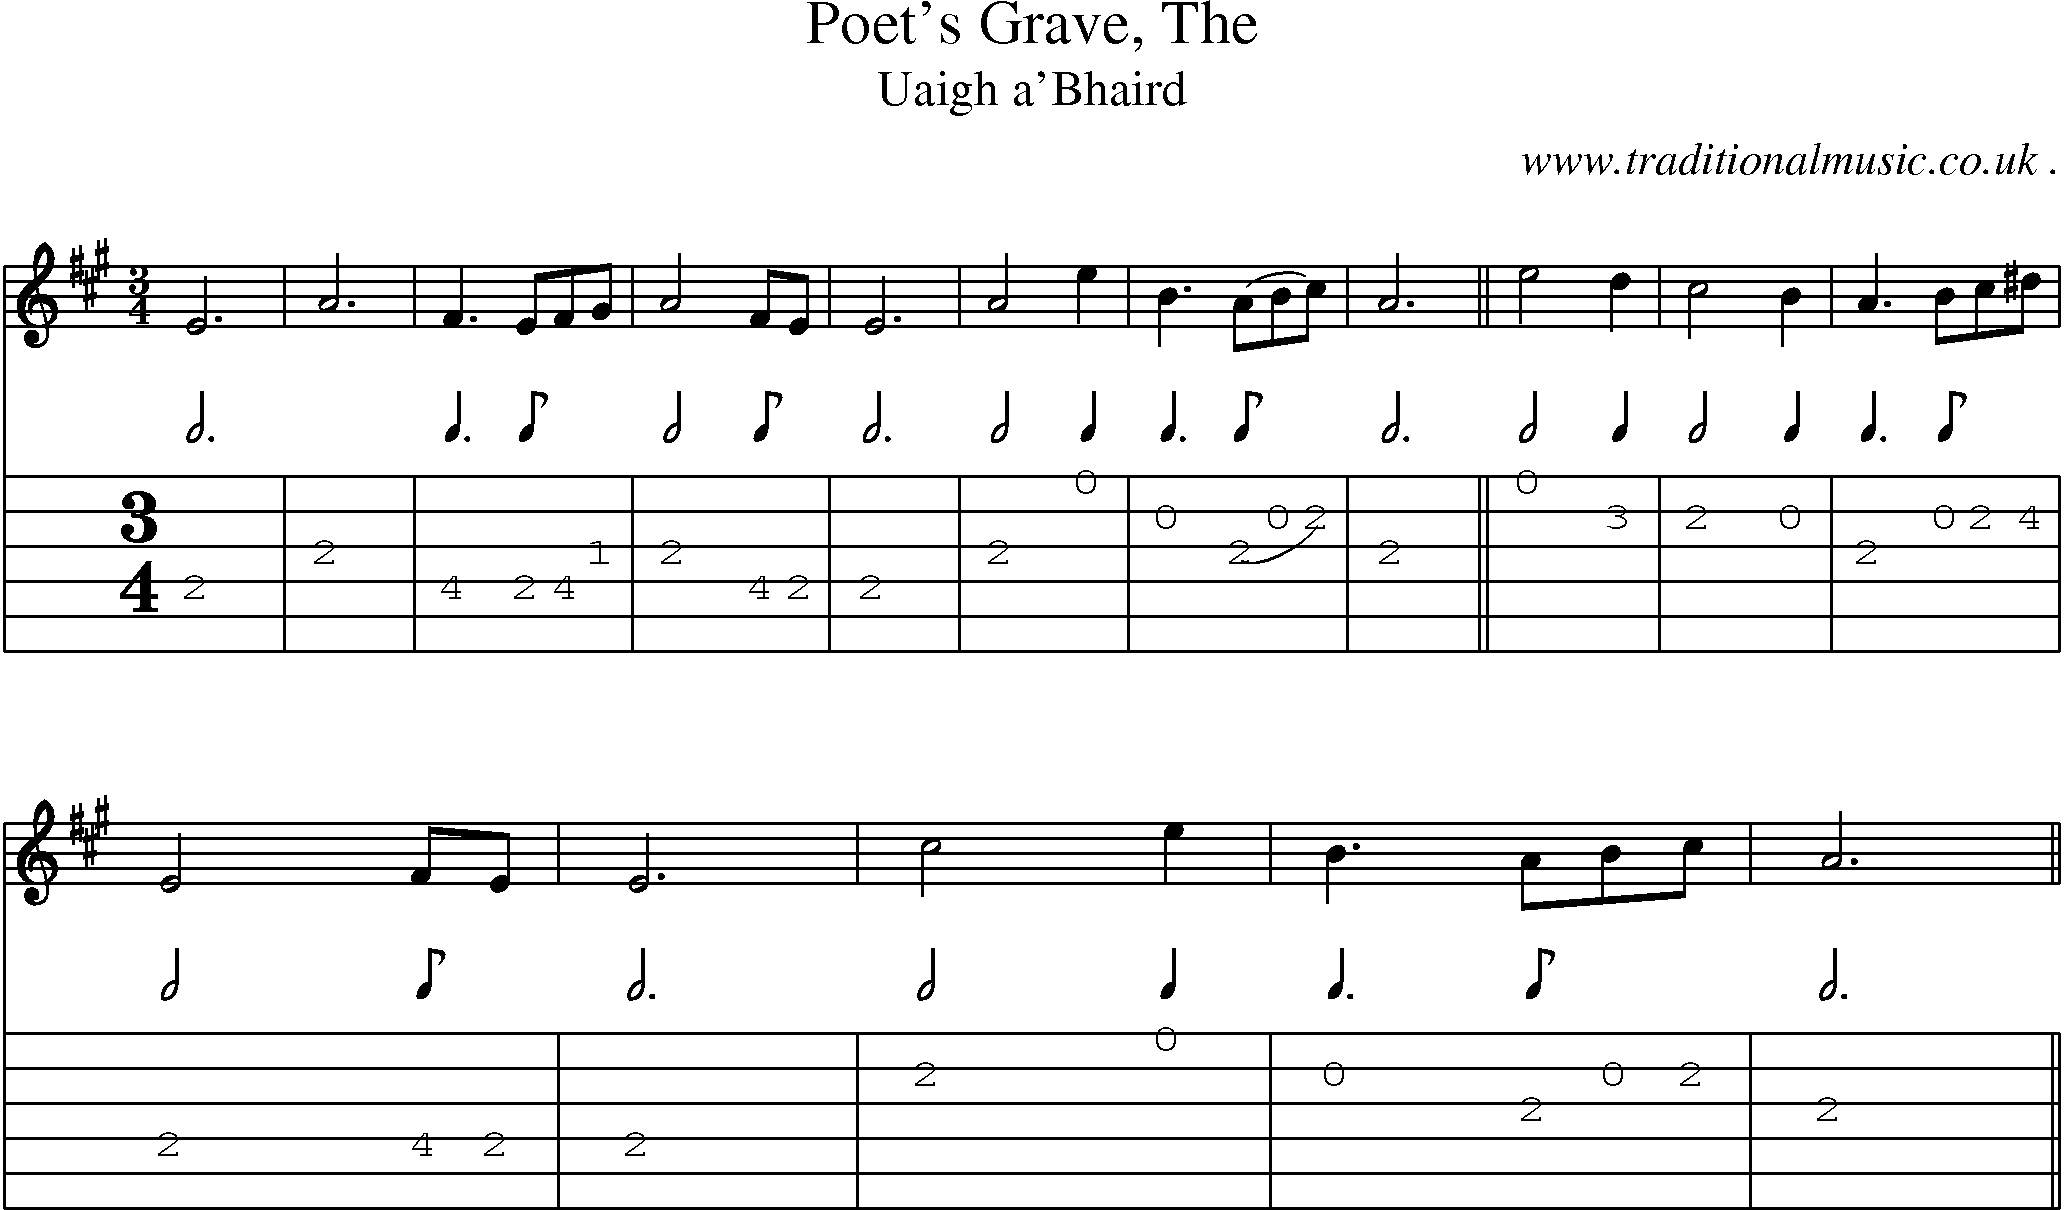 Sheet-music  score, Chords and Guitar Tabs for Poets Grave The